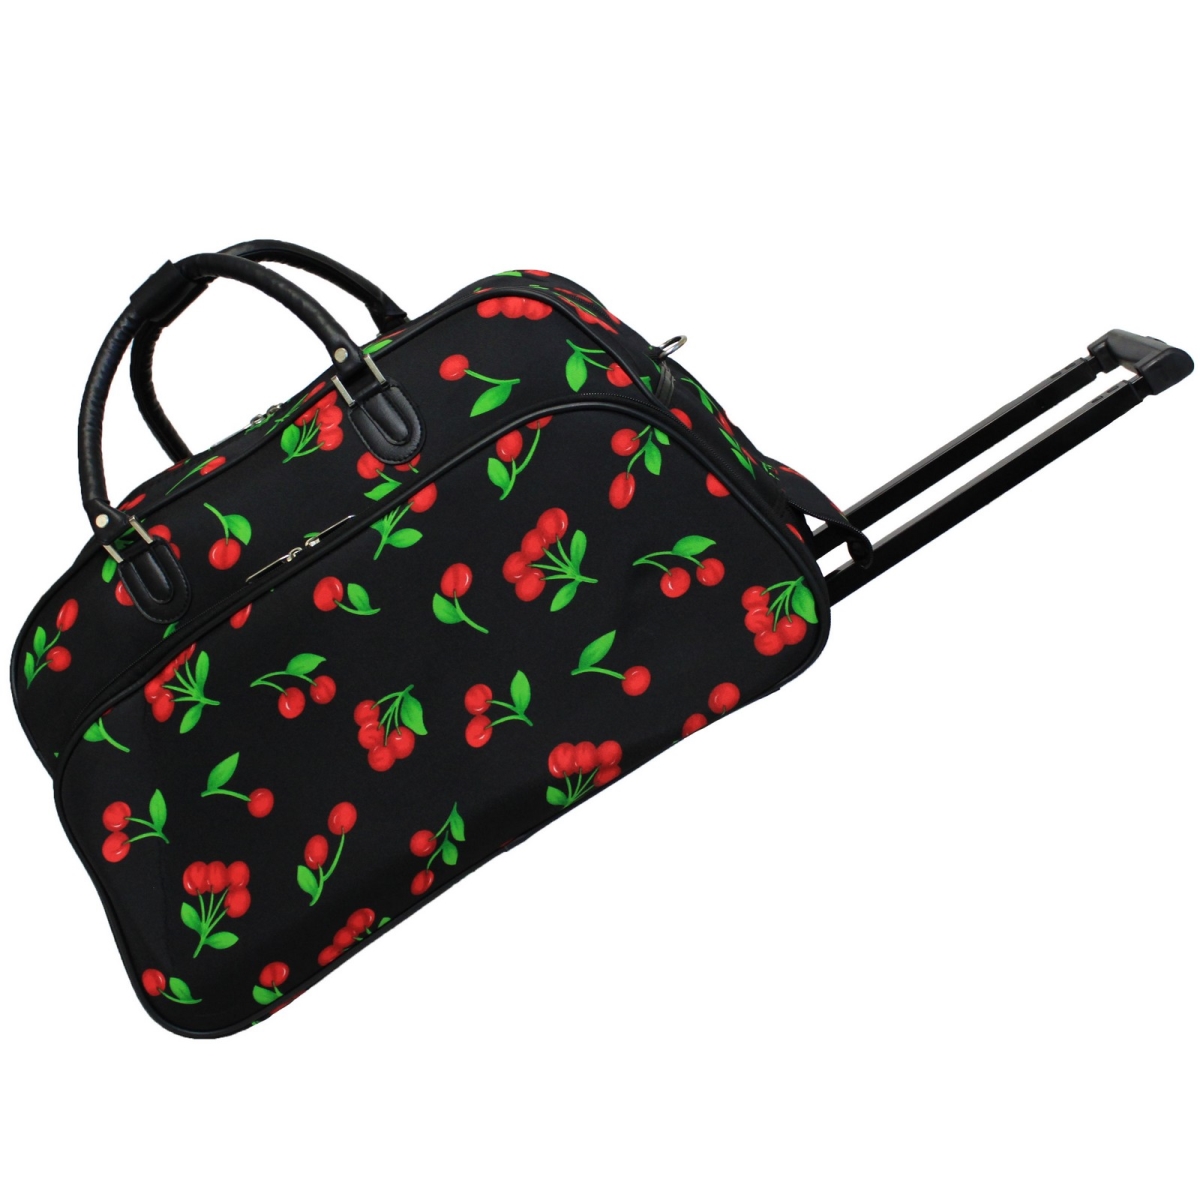 8112022-502 21 In. Carry On Rolling Duffel Bag - Cherry